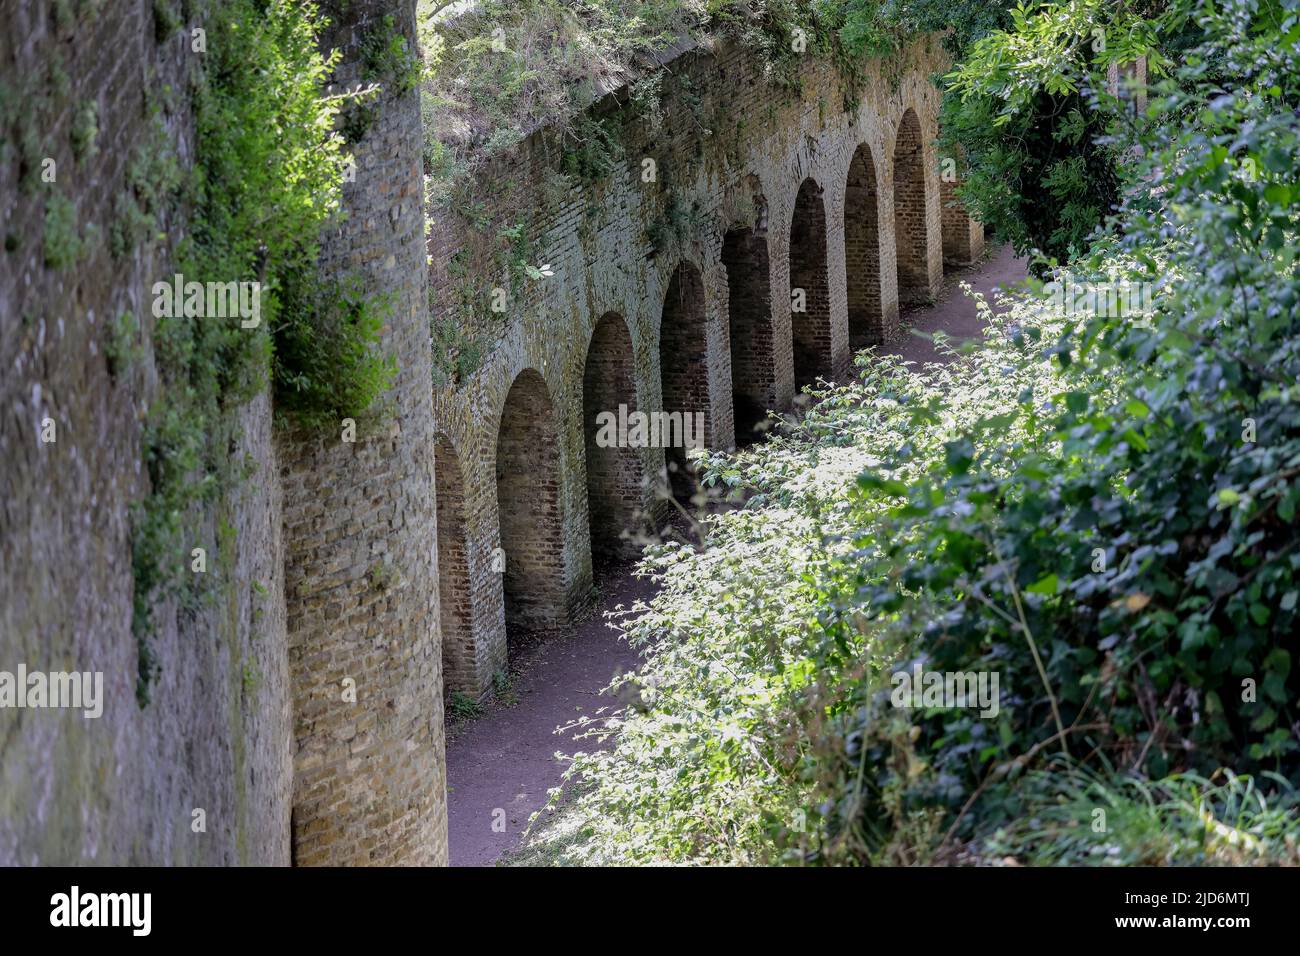 rampart and fortified wall medieval castle prison Stock Photo